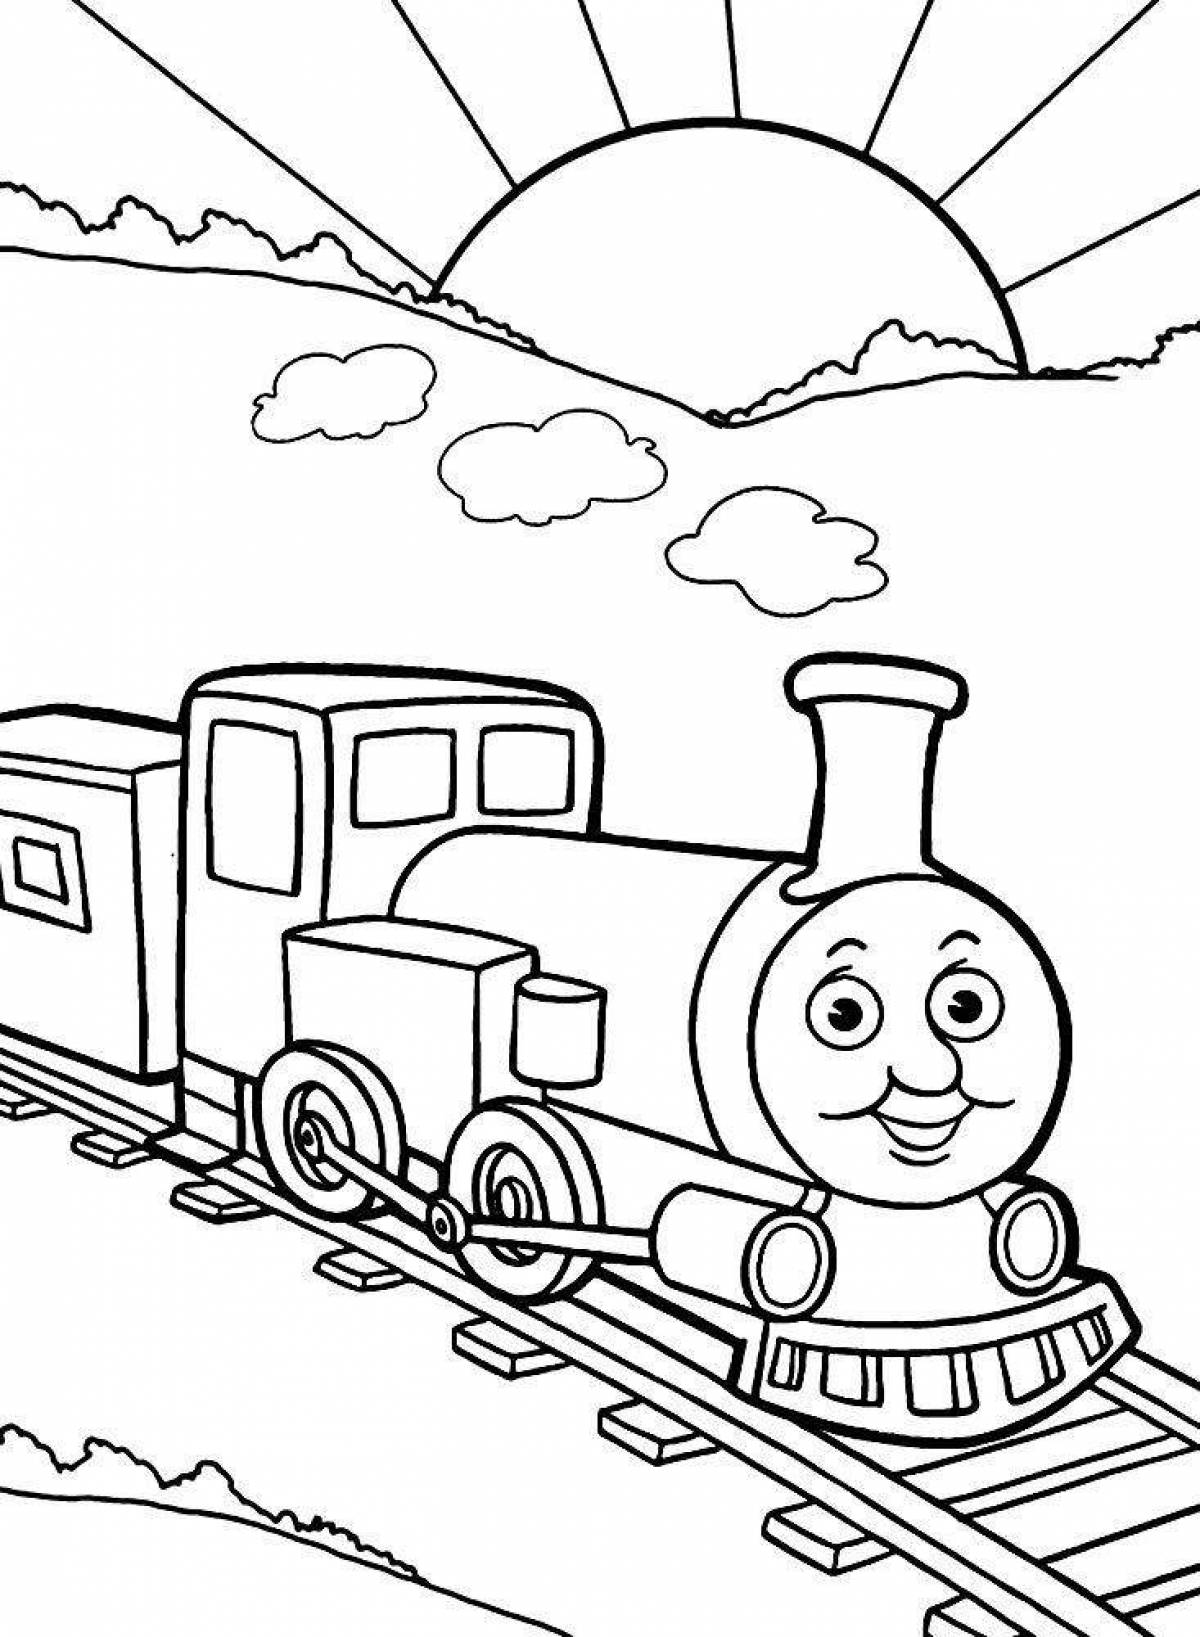 Coloring dazzling train for boys